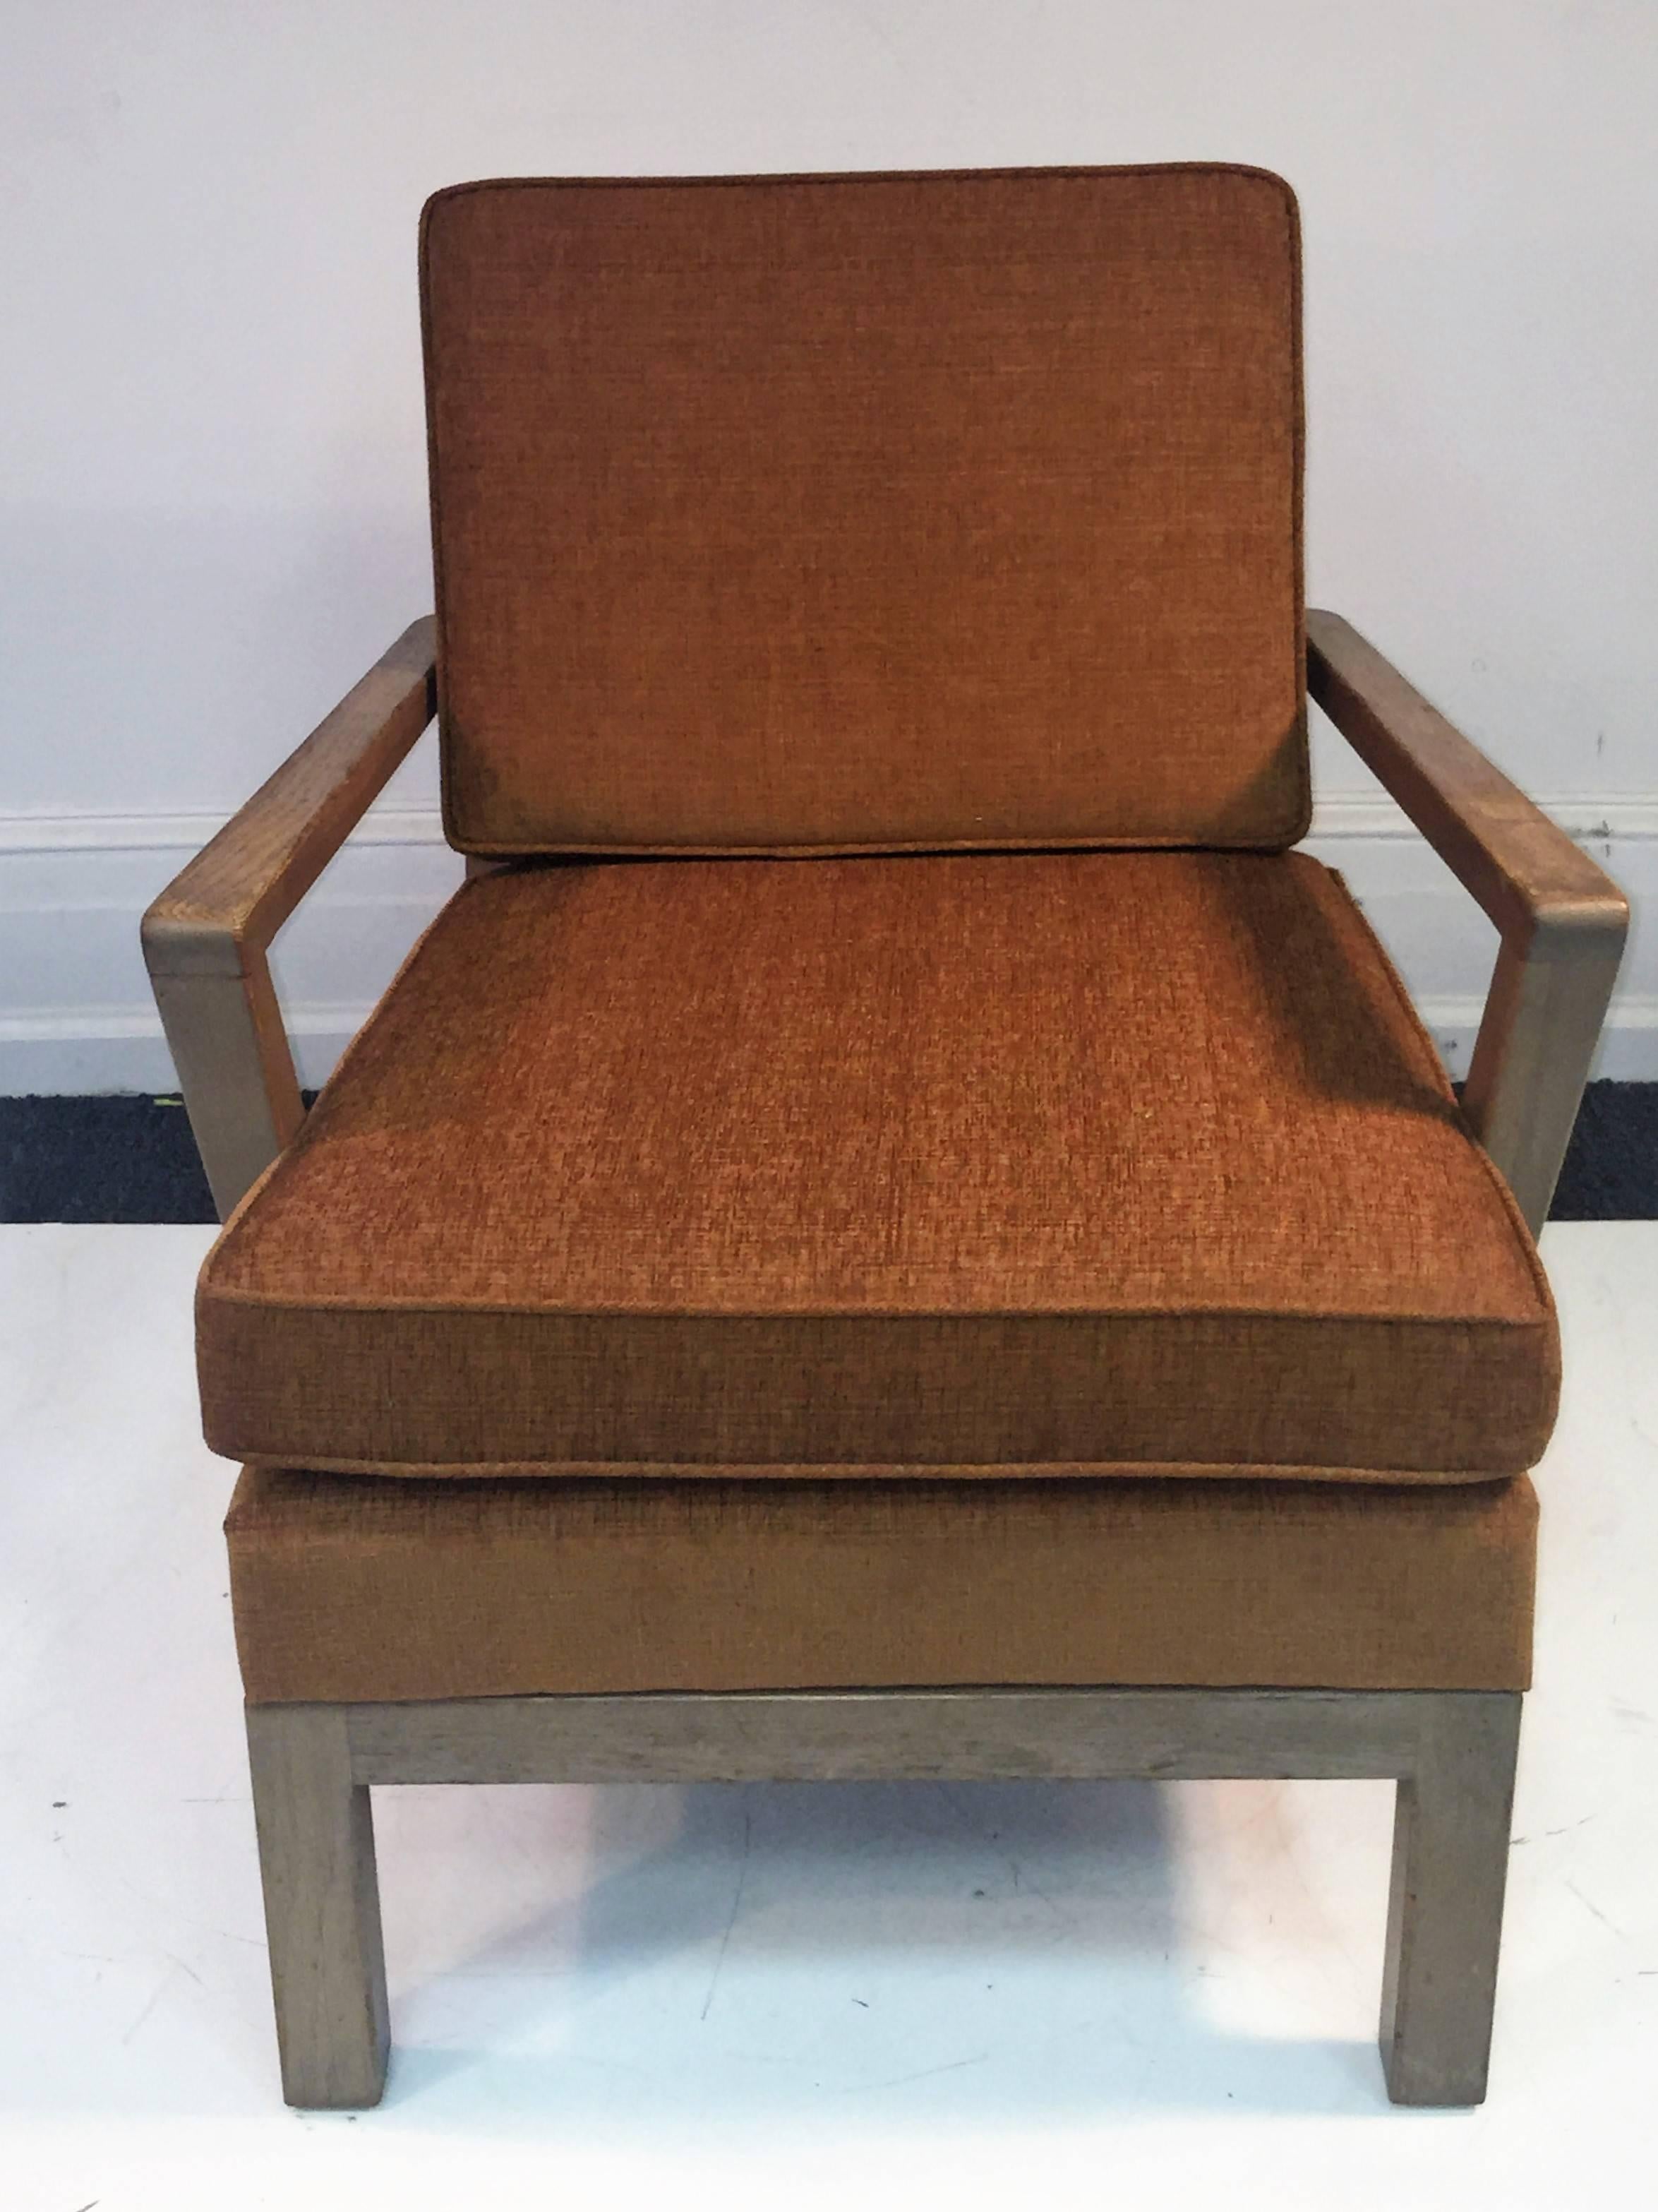 Great pair of modernist cerused oak armchairs in a great apricot fabric. In the style of Samuel Marx, these are a fine pair of chairs perfect for a high end living room. Measures: The width of the armless chair is 24”, the height is 28 1/2